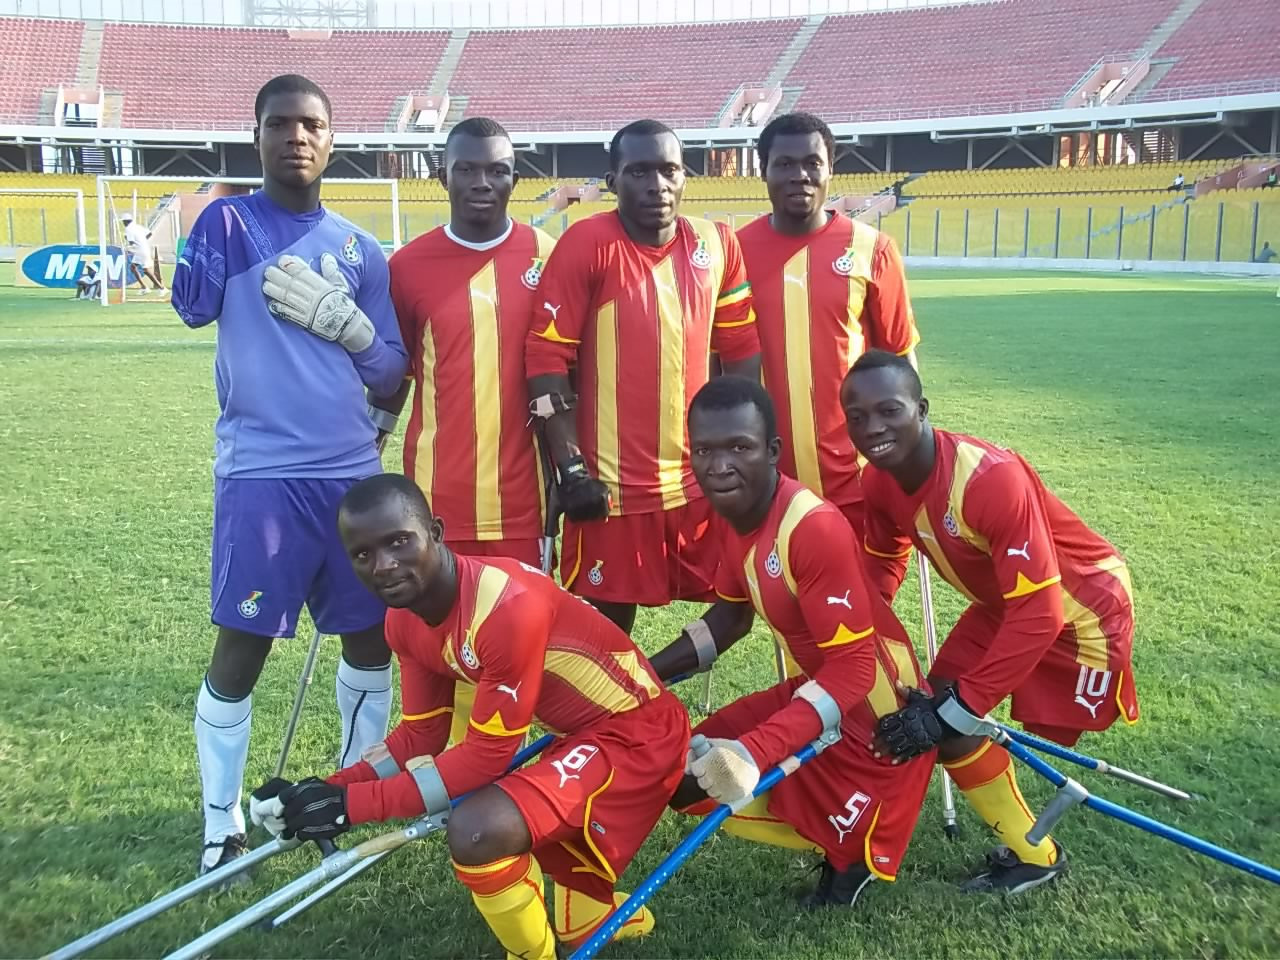 Ghana's amputee football team has had its ban lifted and now can participate in the African Para Games in Accra ©Ghana Amputee Football